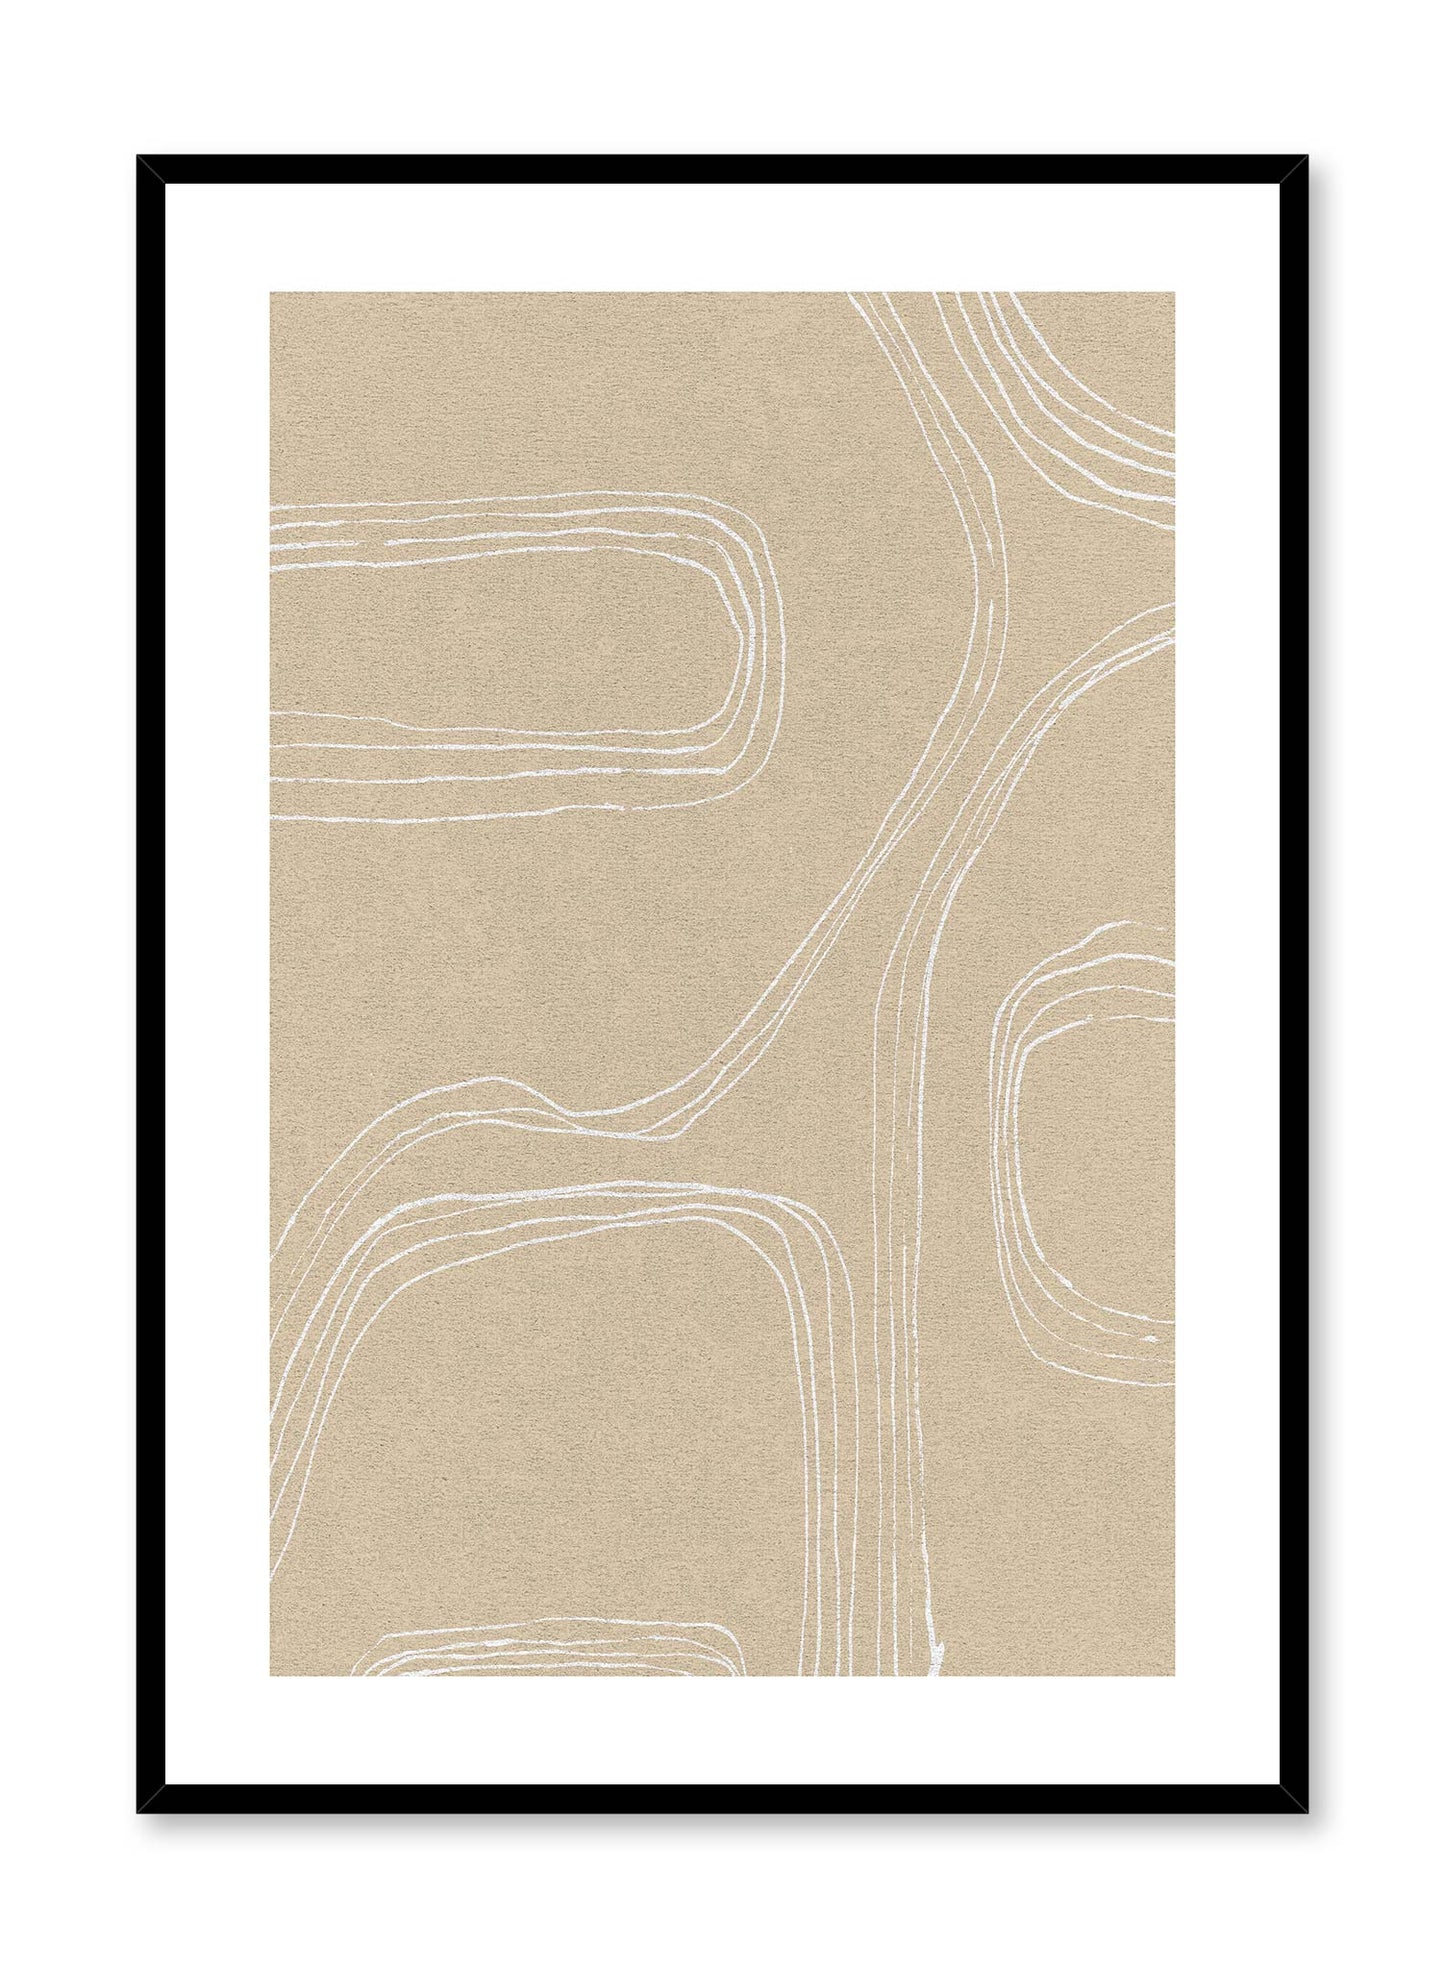 Silica Sand is a minimalist abstract illustration of thin white lines running through a beige background by Opposite Wall.